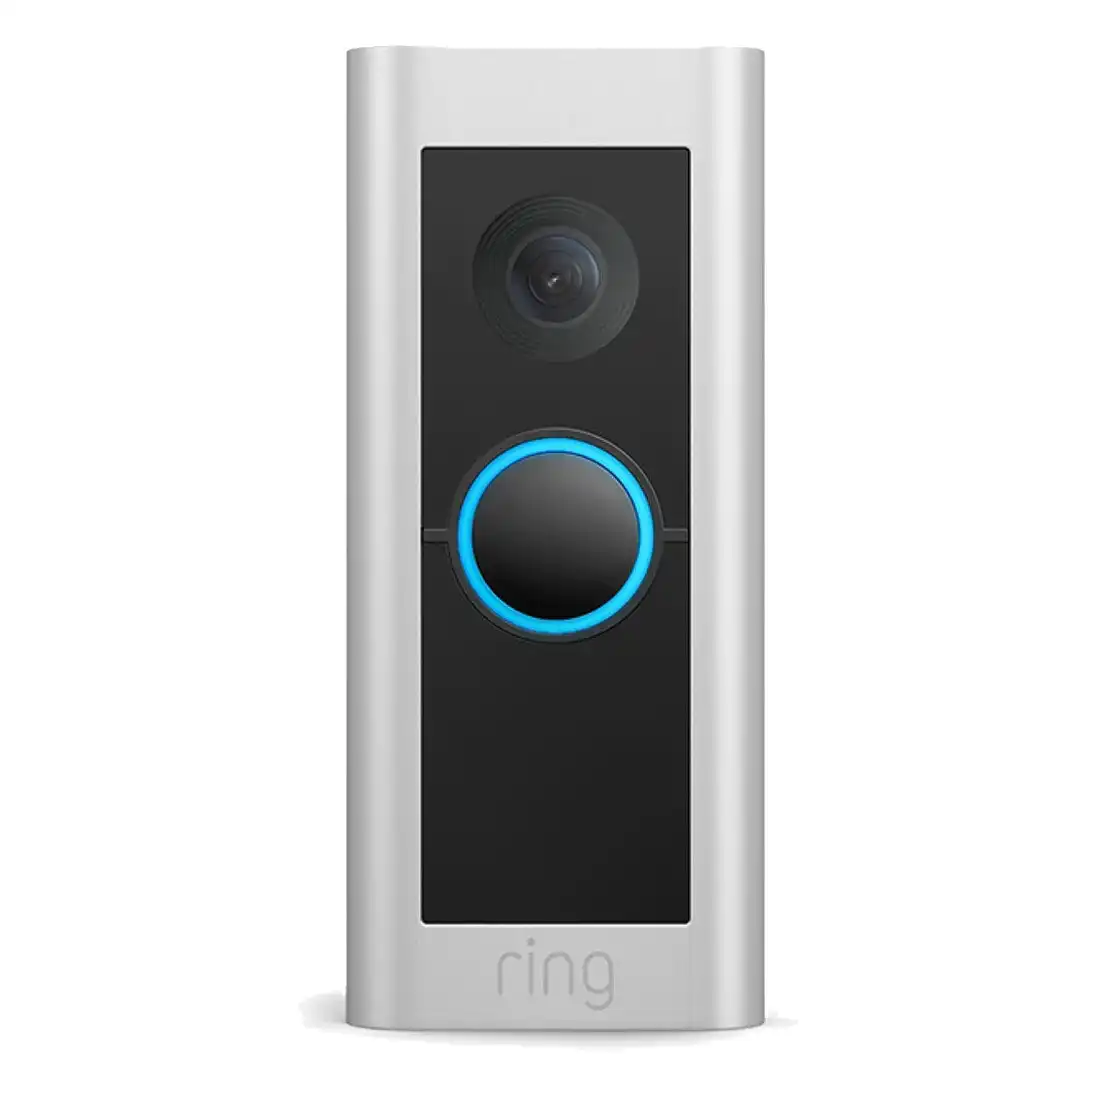 Ring Video Doorbell Pro 2 Wired